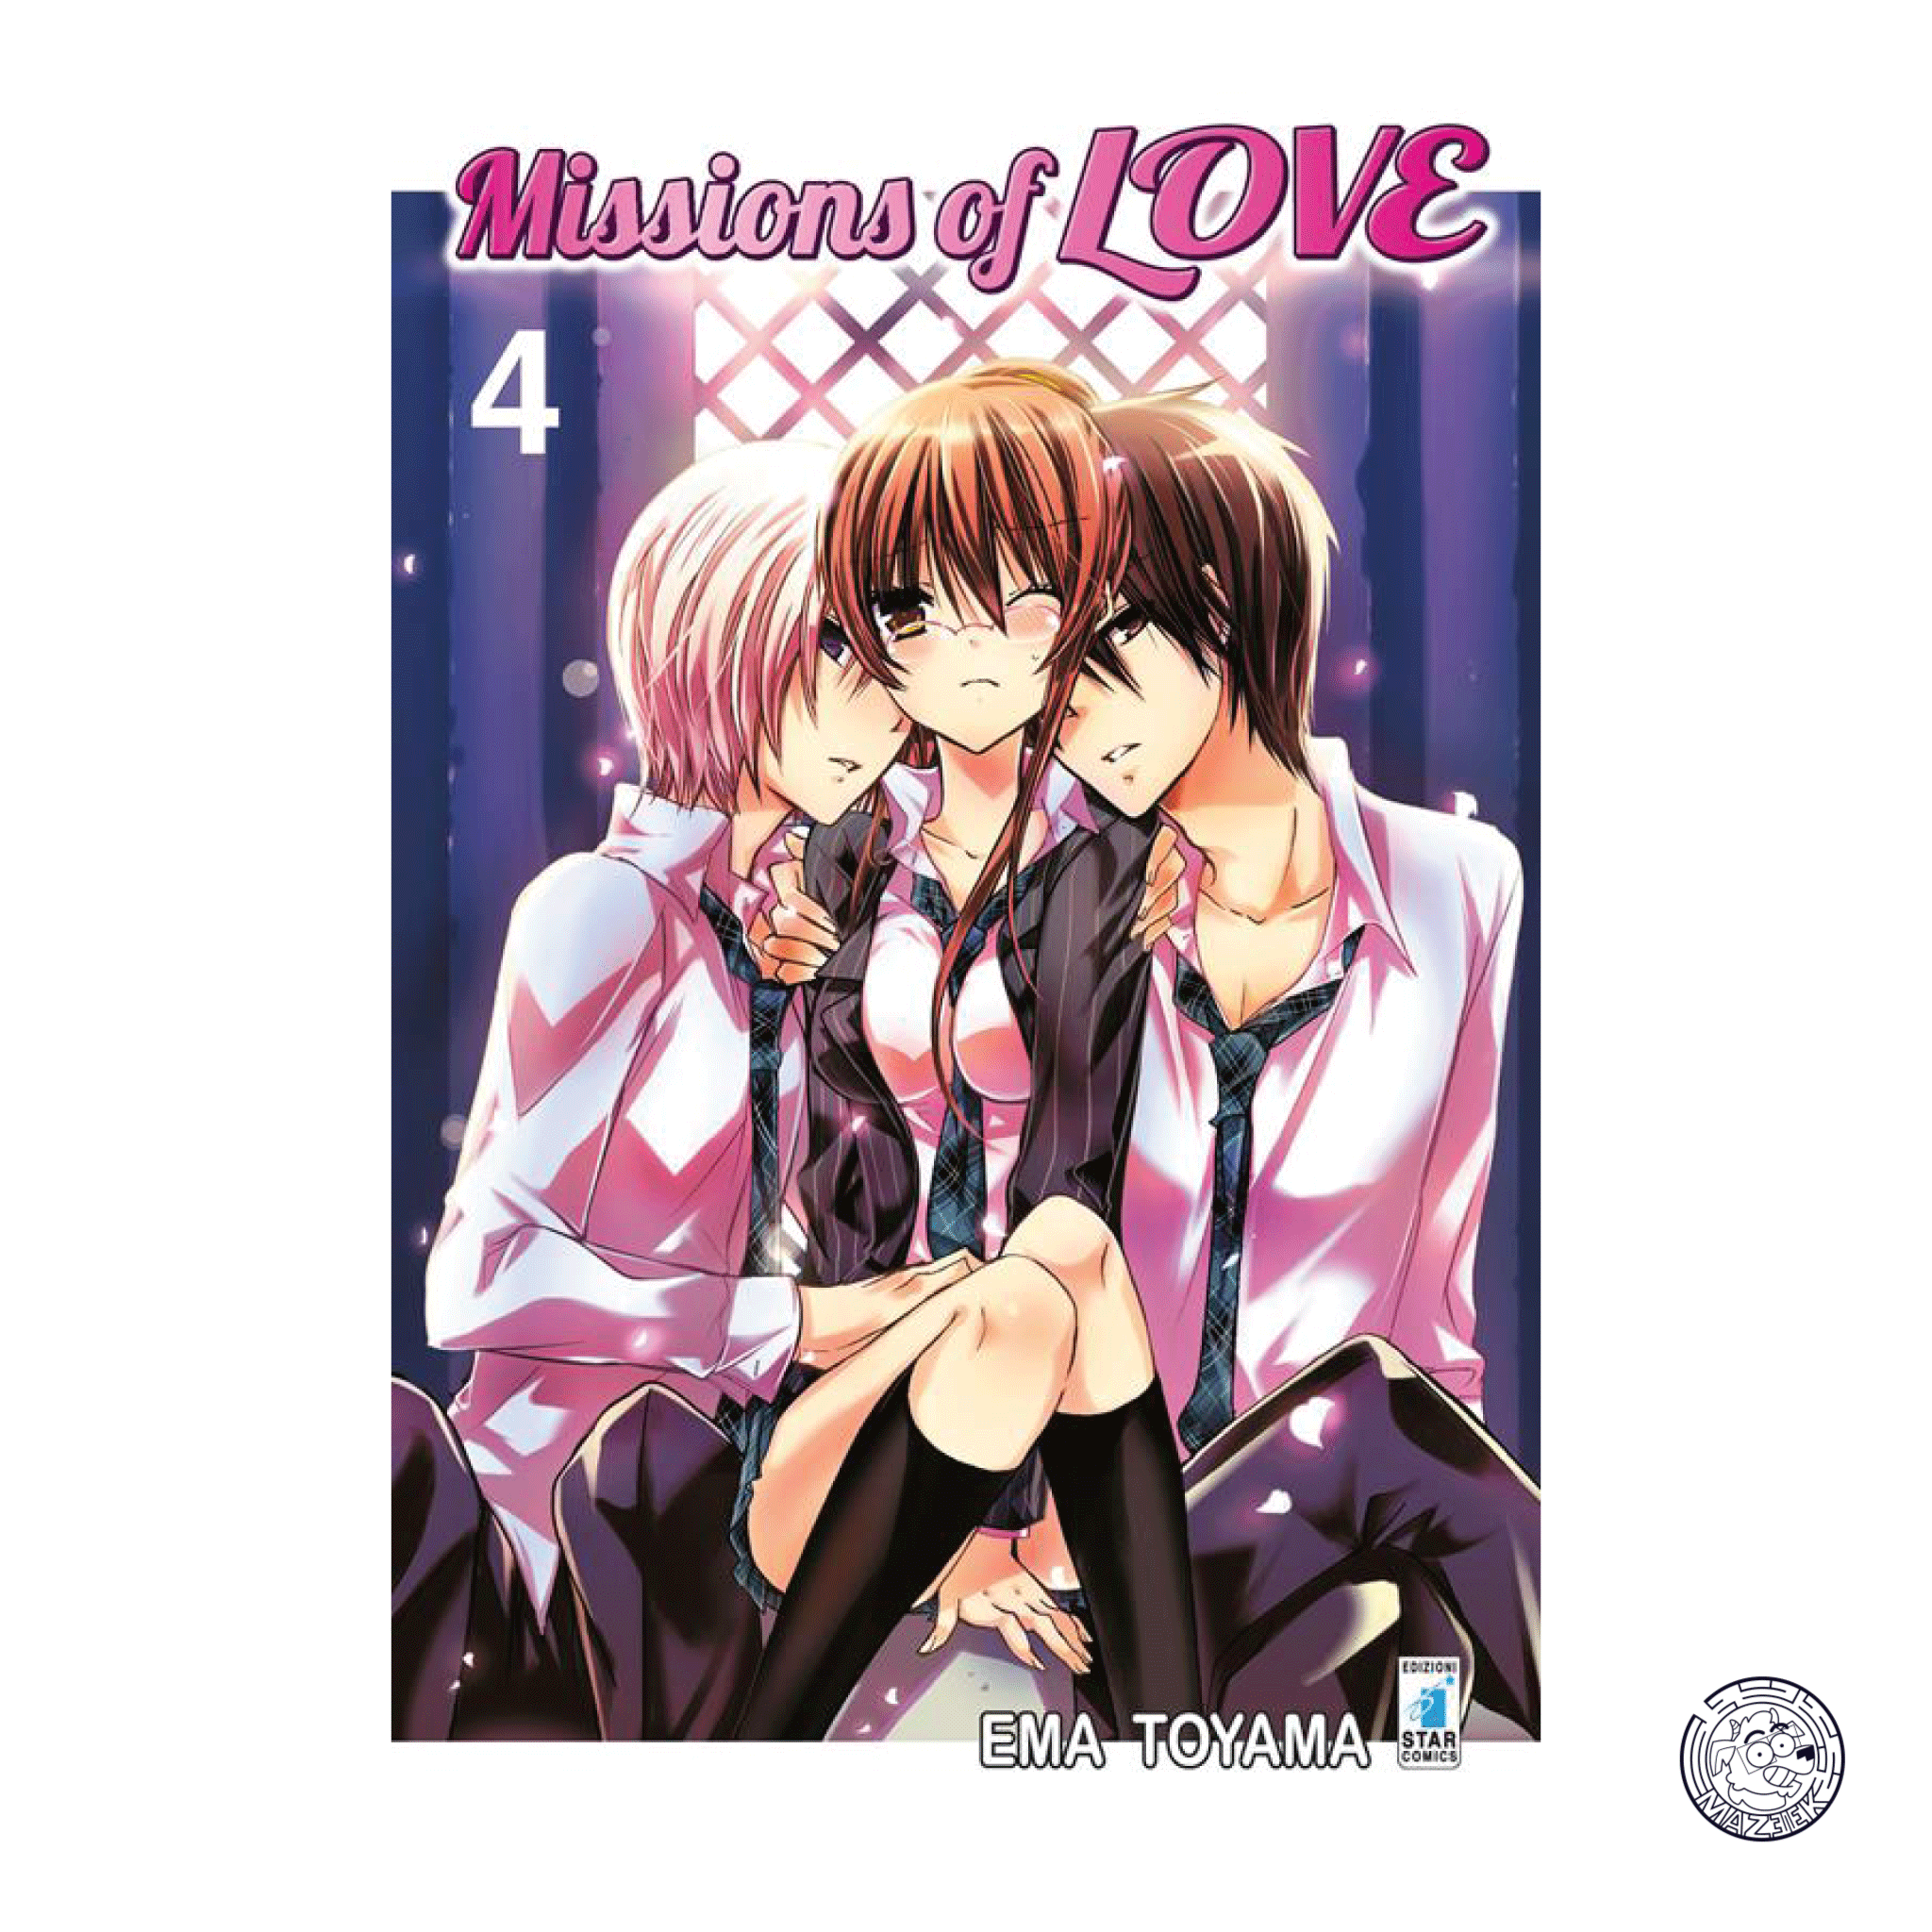 Missions Of Love 04